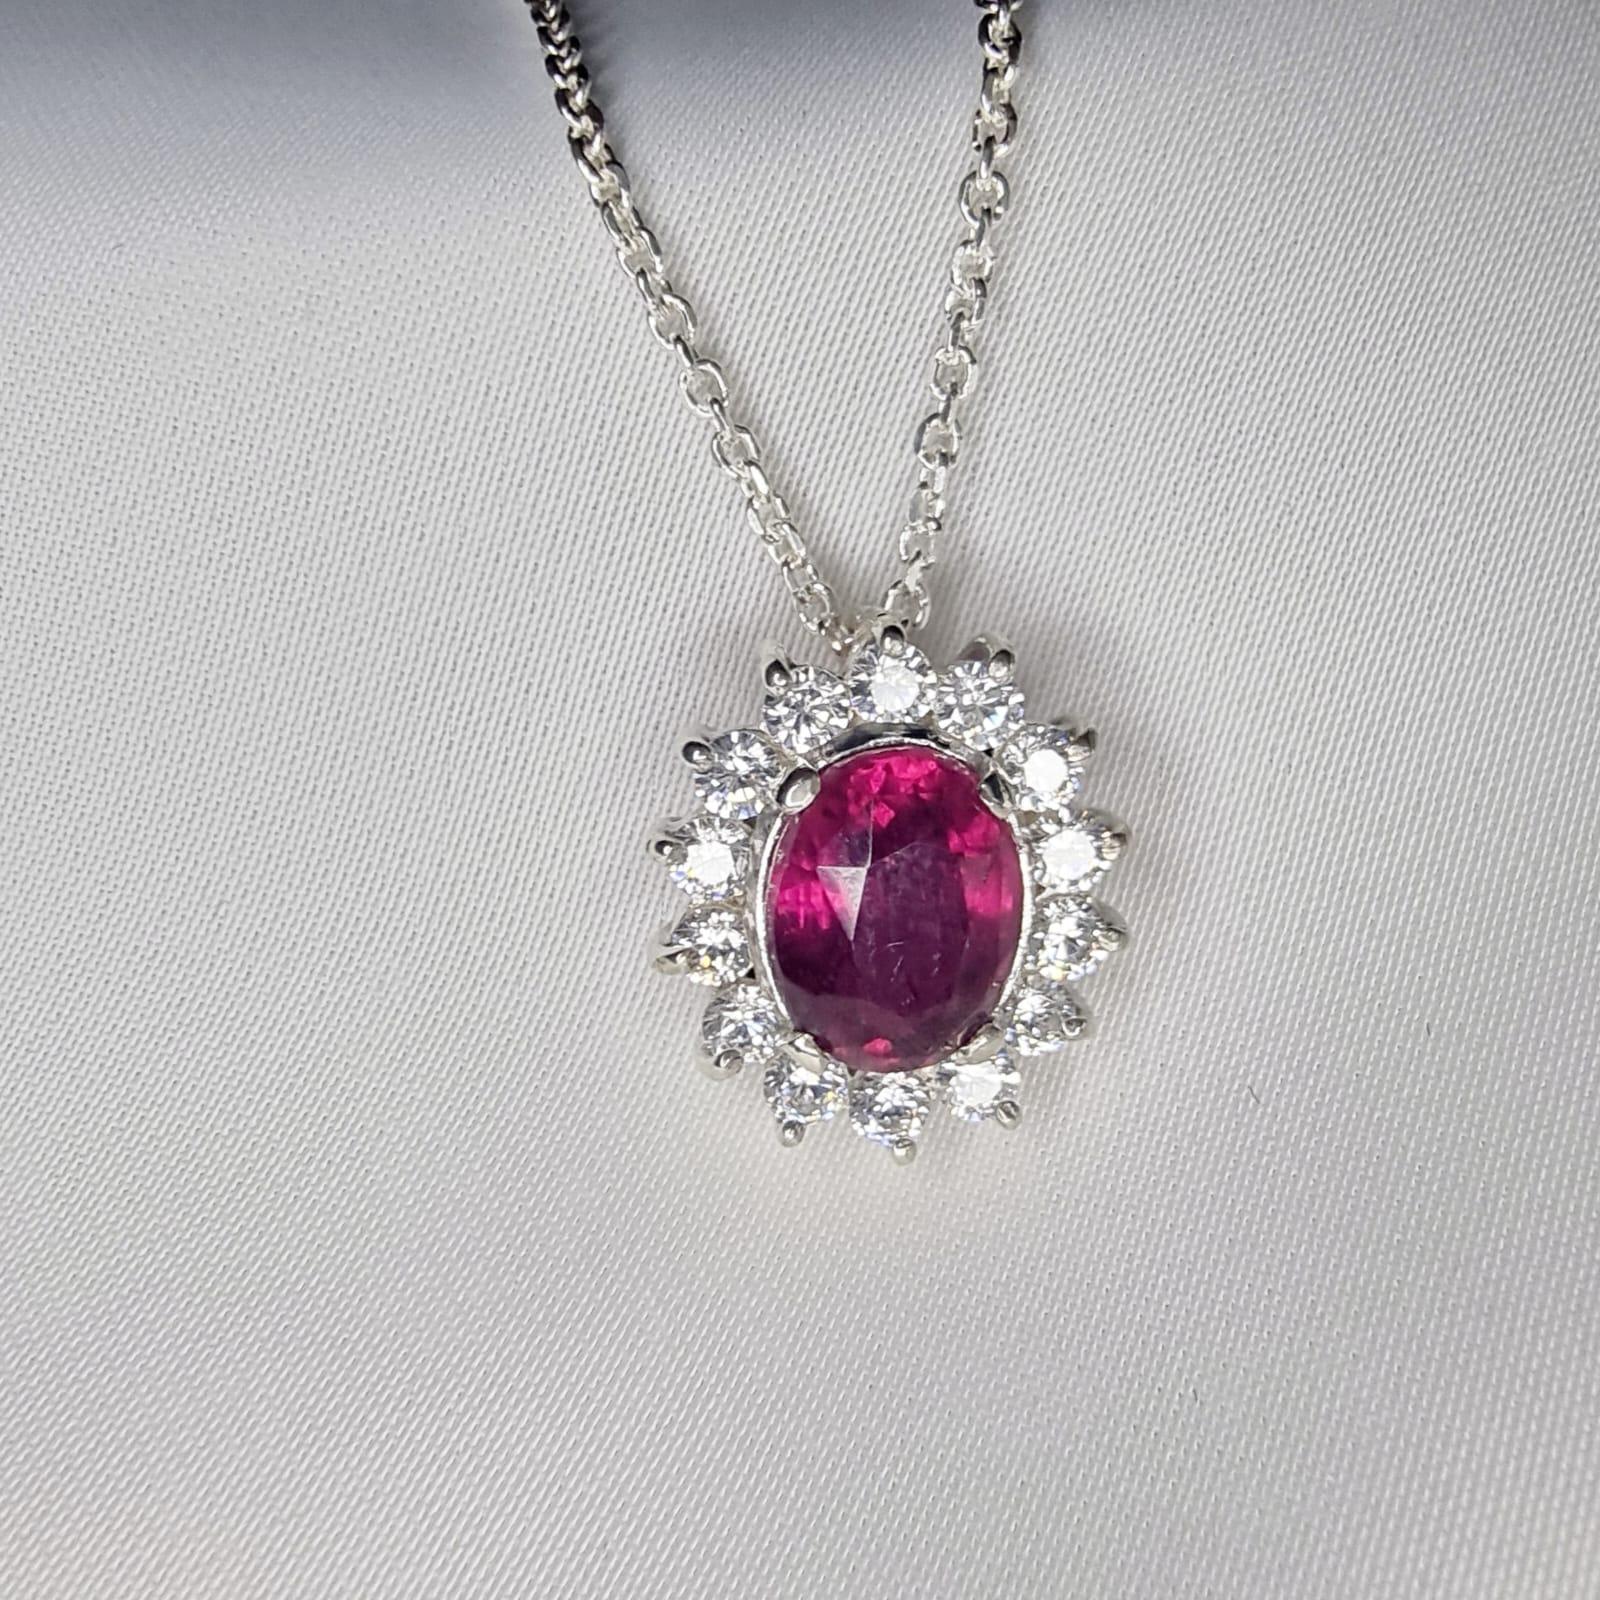 3ct Oval Cut Natural Deep Pink Tourmaline Pendant  In New Condition For Sale In Sheridan, WY